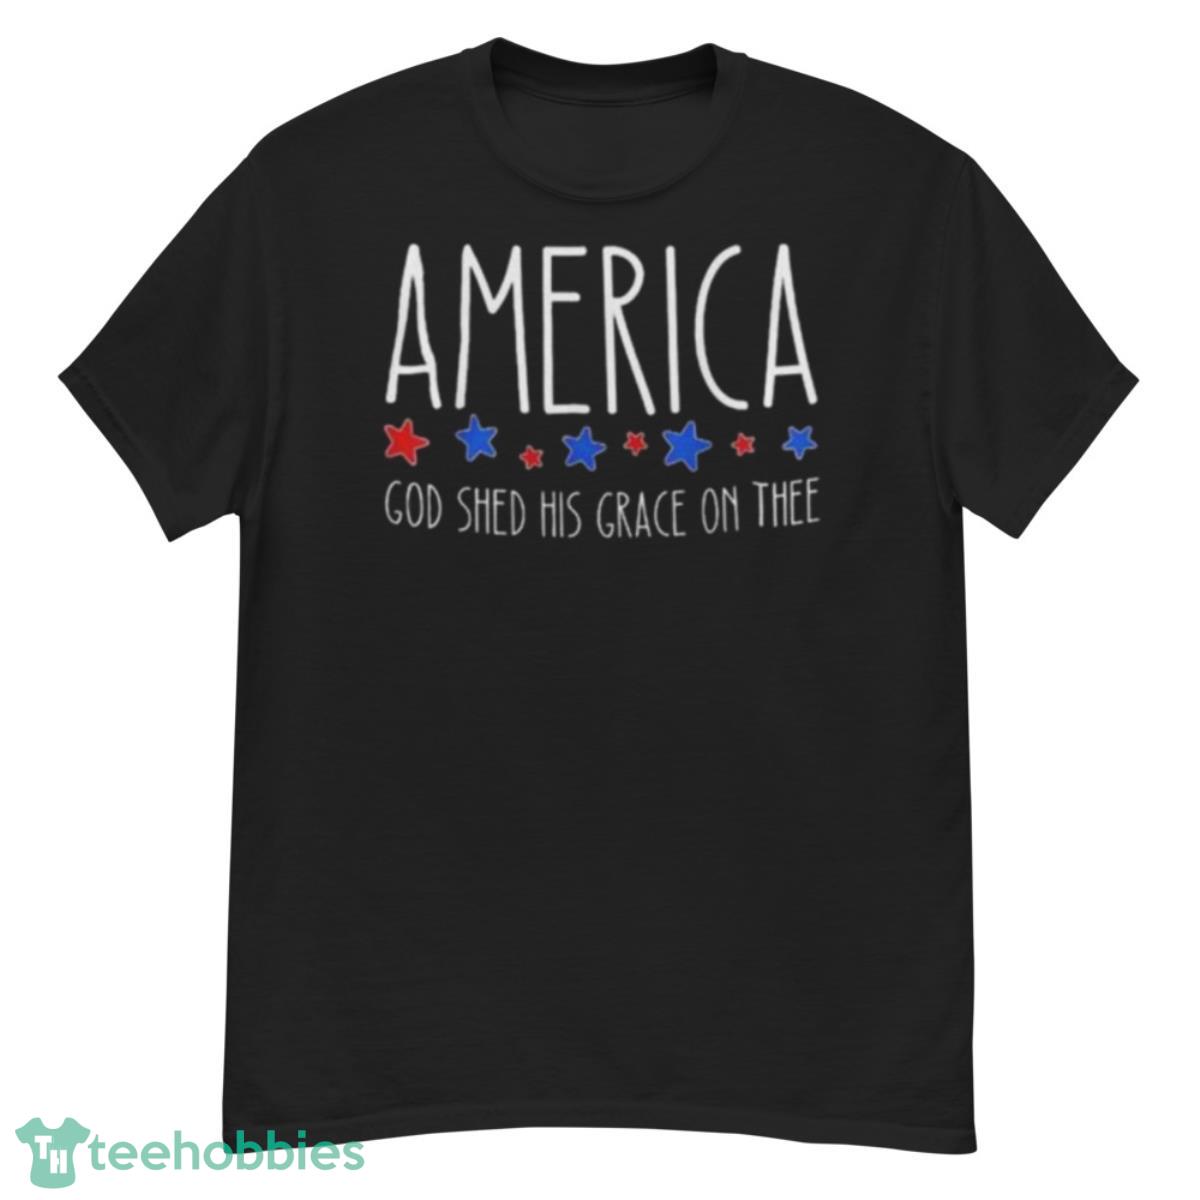 America God Shed His Grace On Thee 2023 Shirt - G500 Men’s Classic T-Shirt